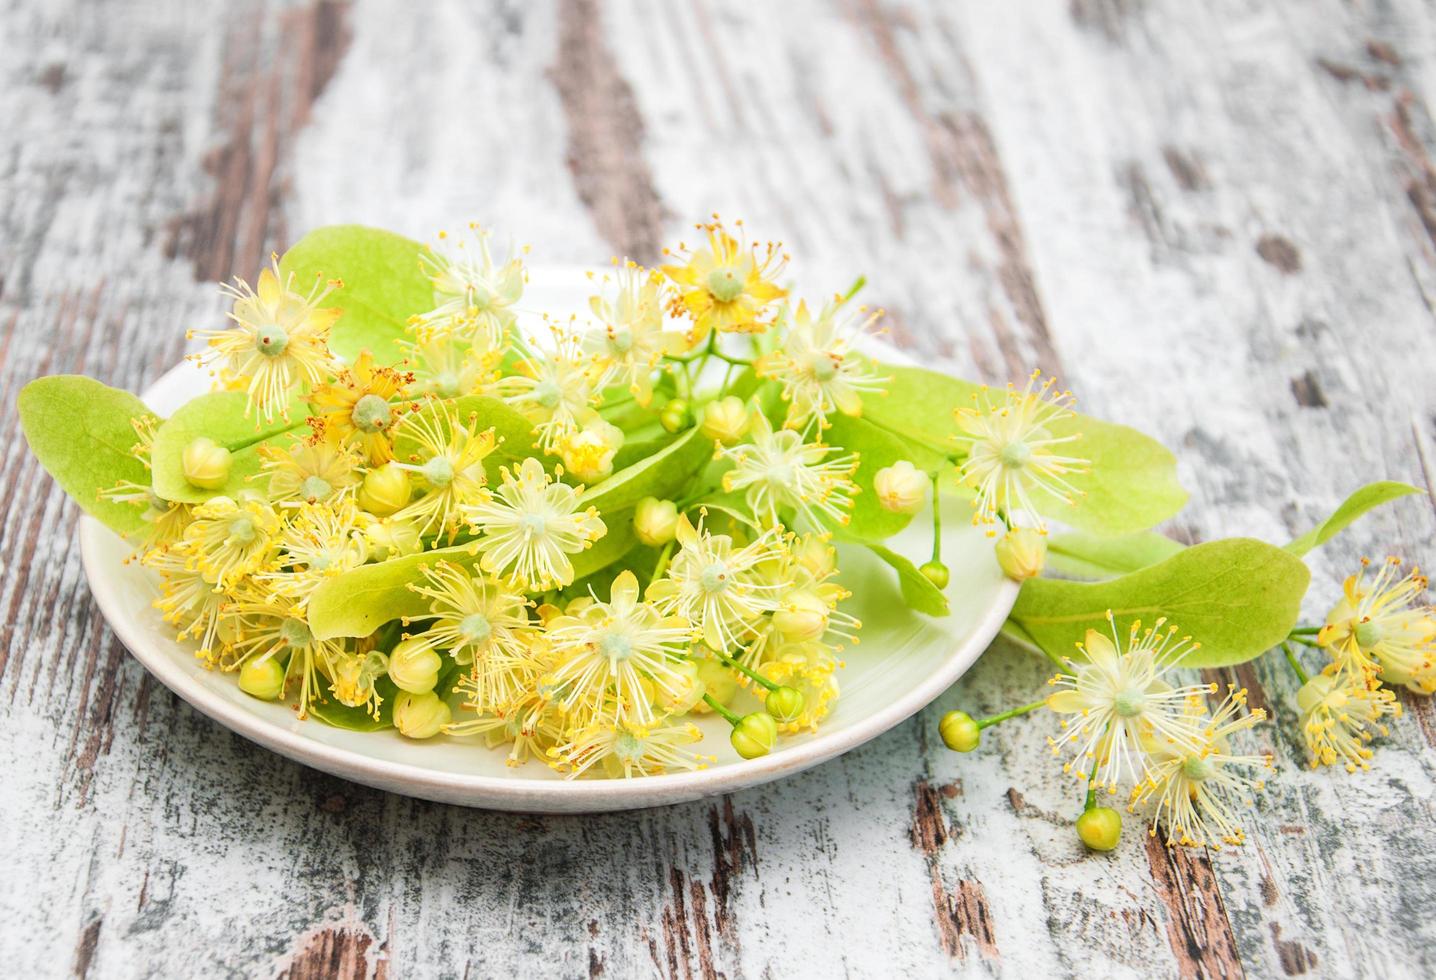 Plate with linden flowers photo